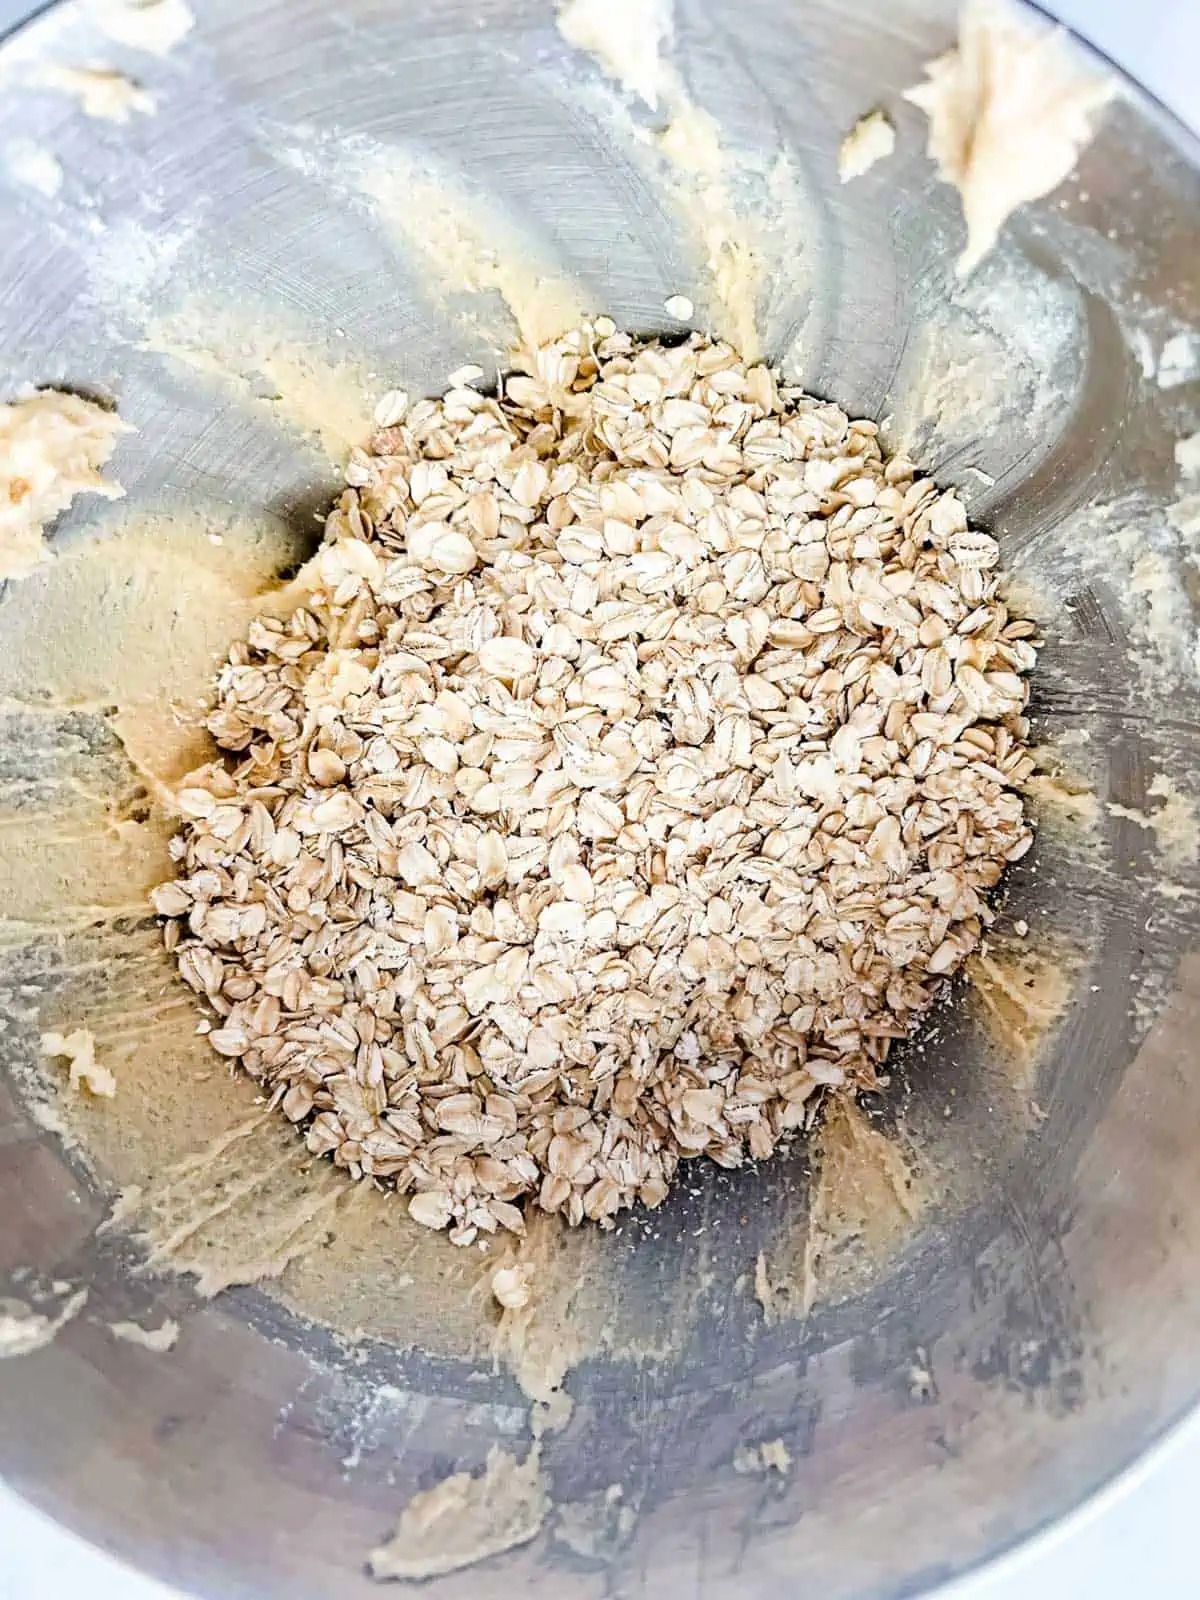 Oatmeal that had just been added to cookie dough.